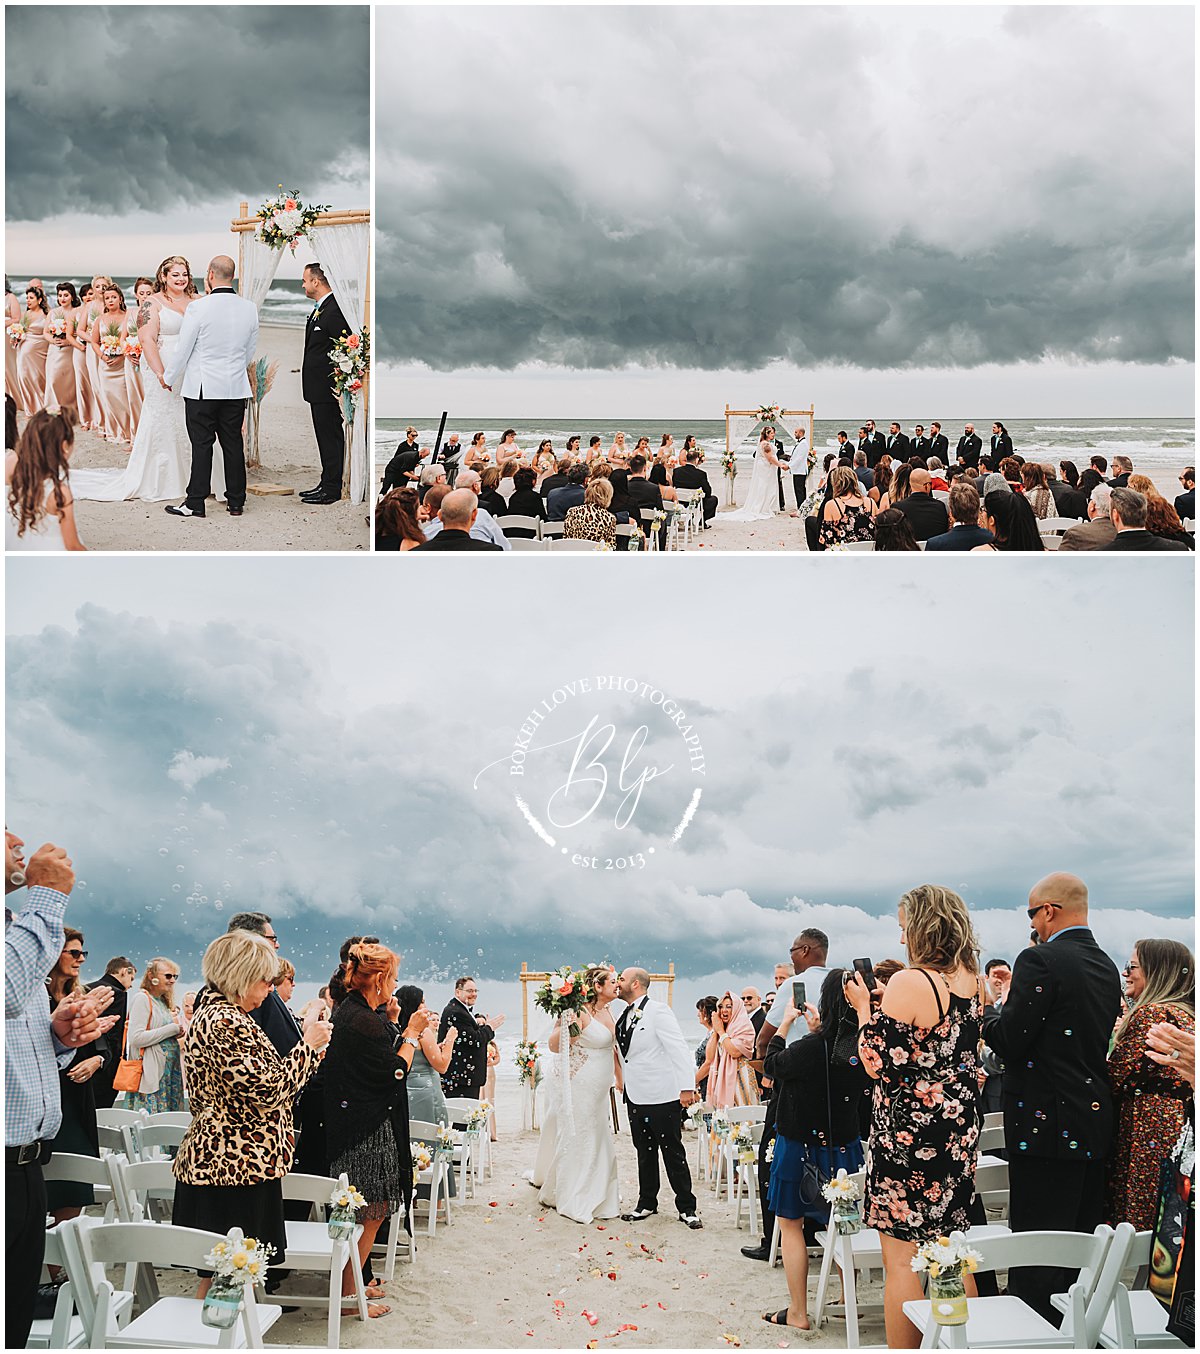 Photography by Bokeh Love Photography, stormy rainy wedding ceremony on beach at the Flanders Hotel in Ocean City